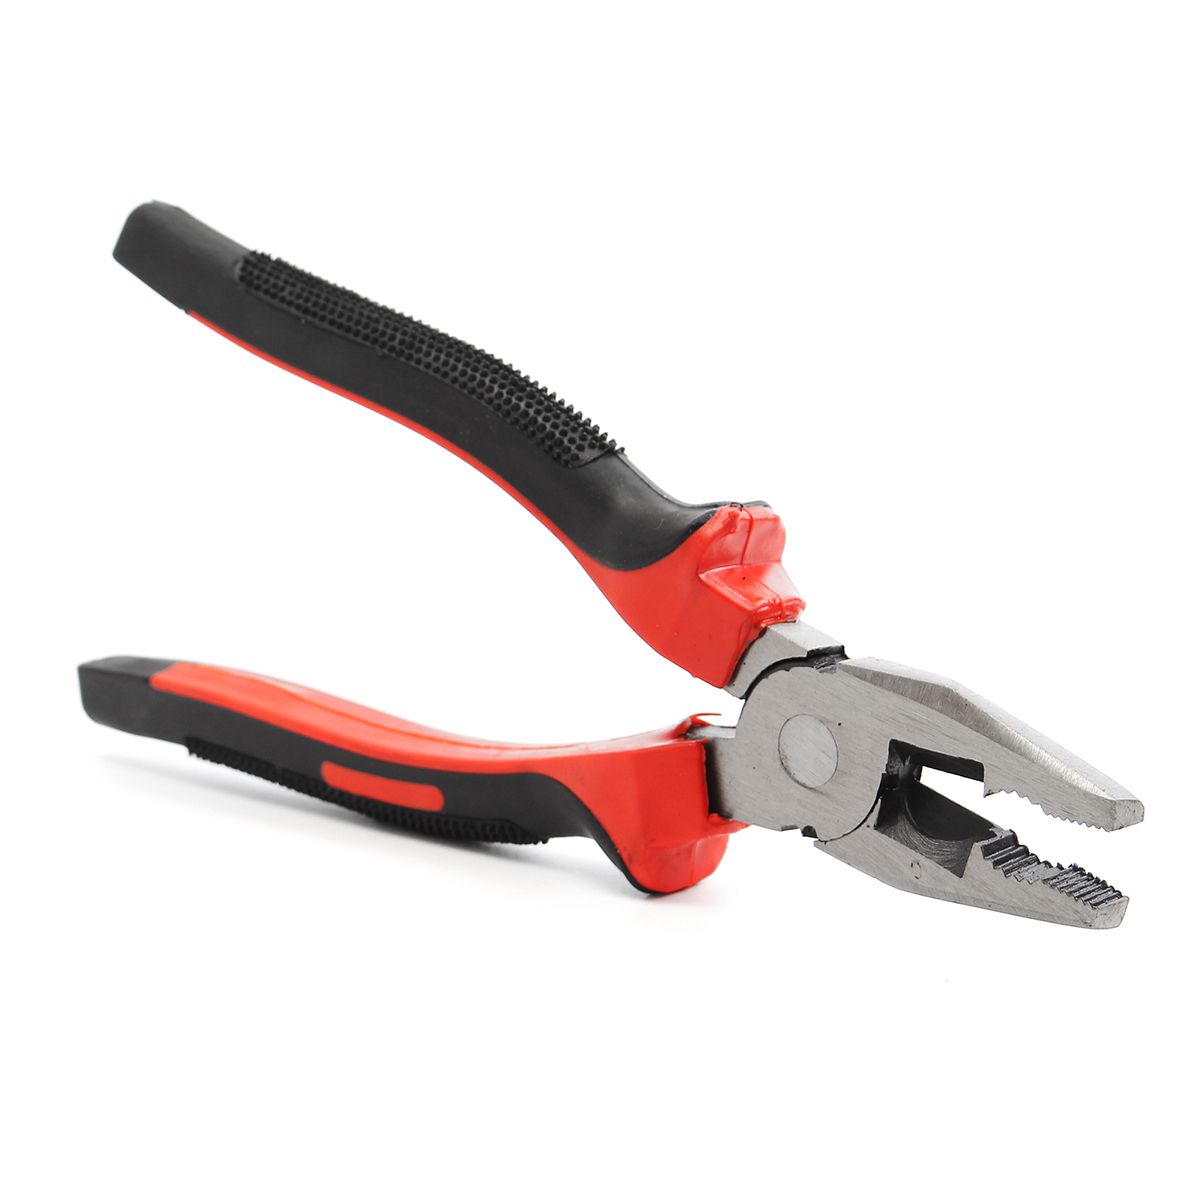 3Pcs-8inch-inch-Heavy-Duty-Long-Nose-Combination-Cutter-Plier-All-Purpose-1130305